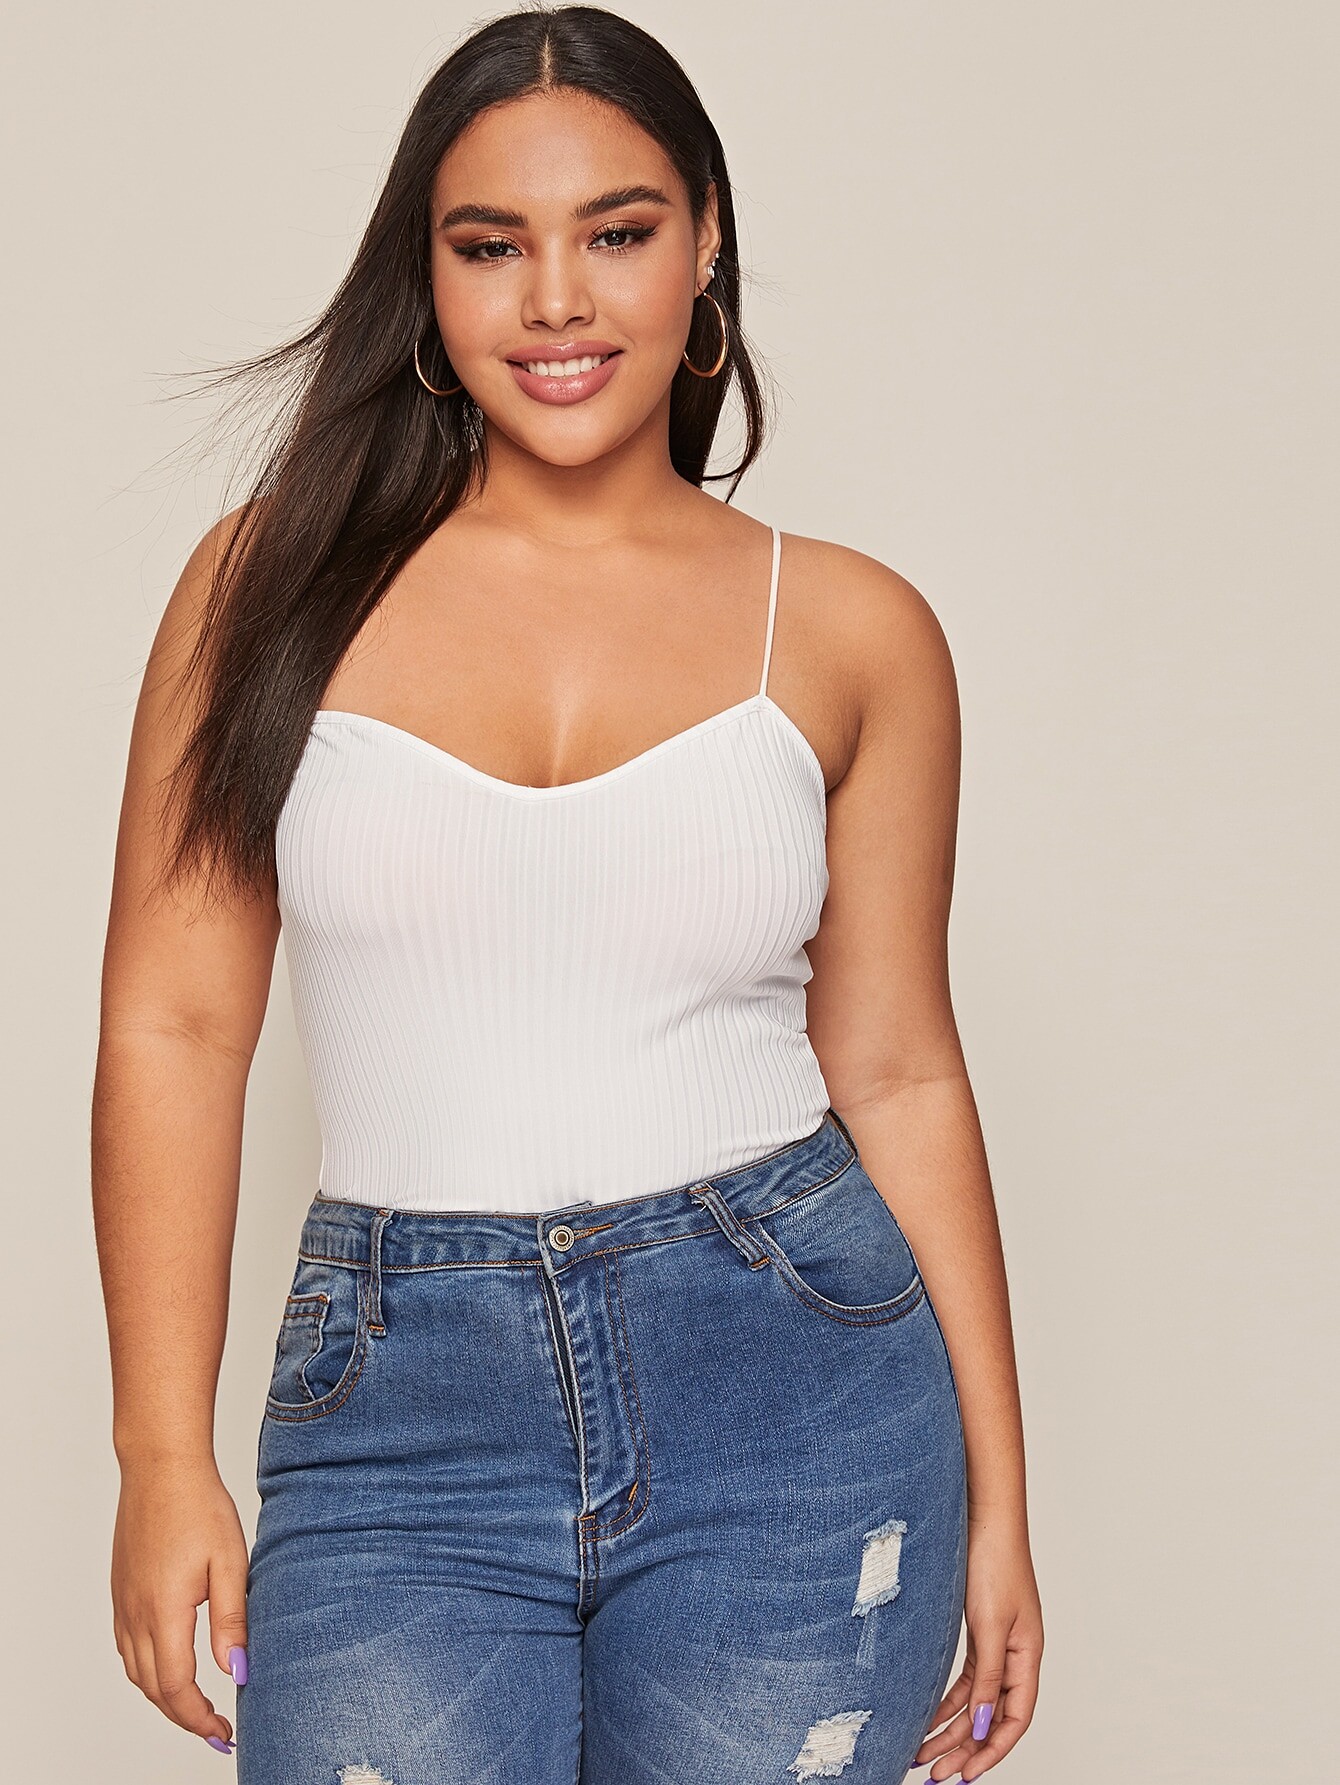 Name of this plus size SHEIN model? Can't find her... - Model ID - Bellazon